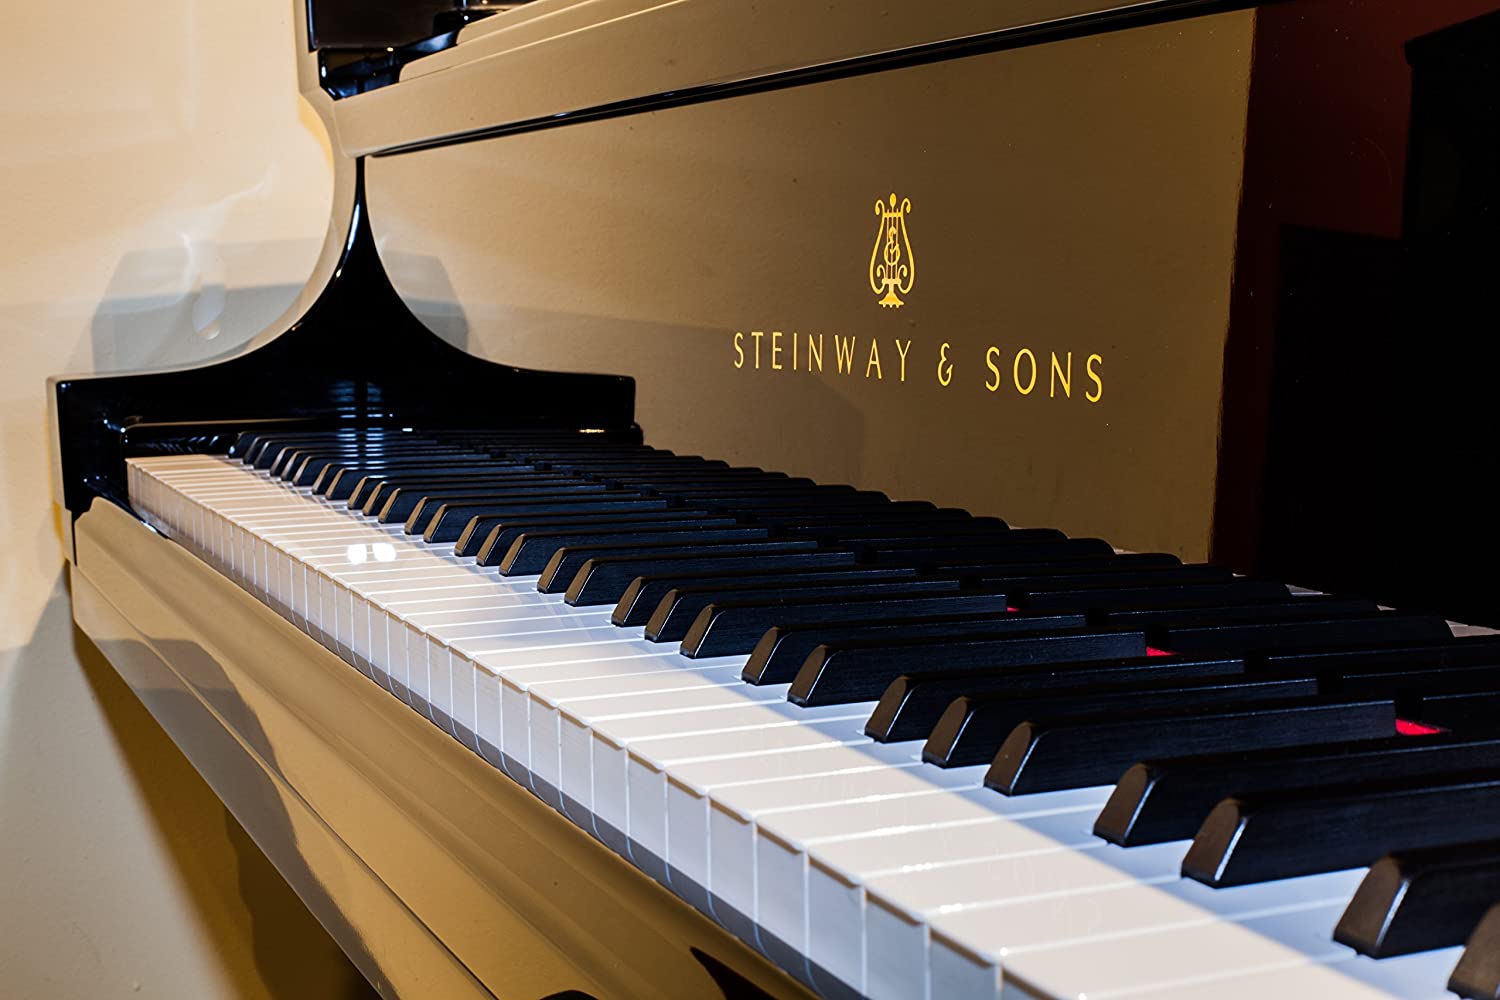 signs someone is filthy rich - A Steinway concert grand piano